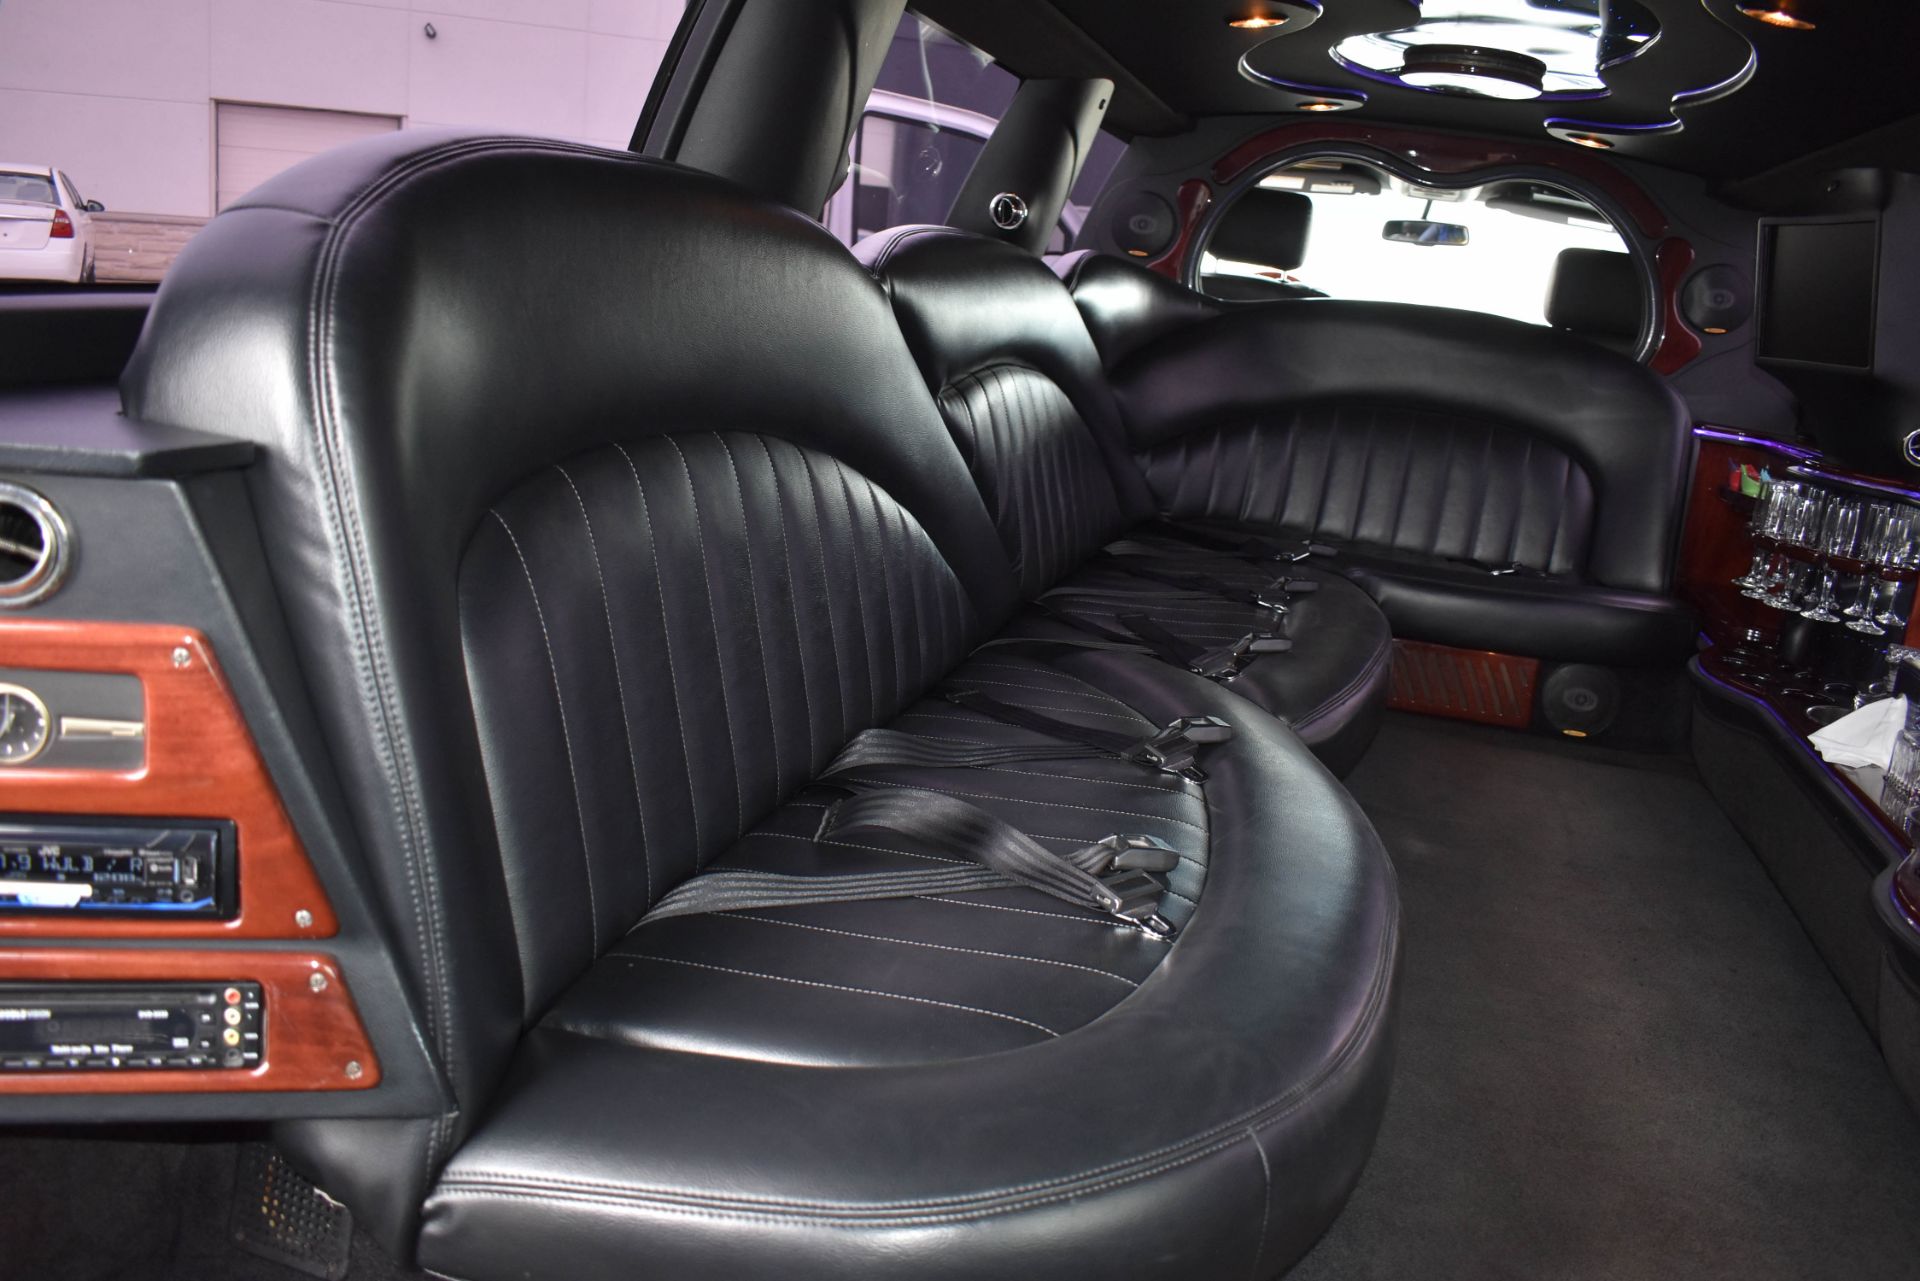 LINCOLN (2006) NAVIGATOR 14 PASSENGER STRETCH LIMOUSINE WITH 8 CYLINDER 5.4L GAS ENGINE, 219, - Image 17 of 21